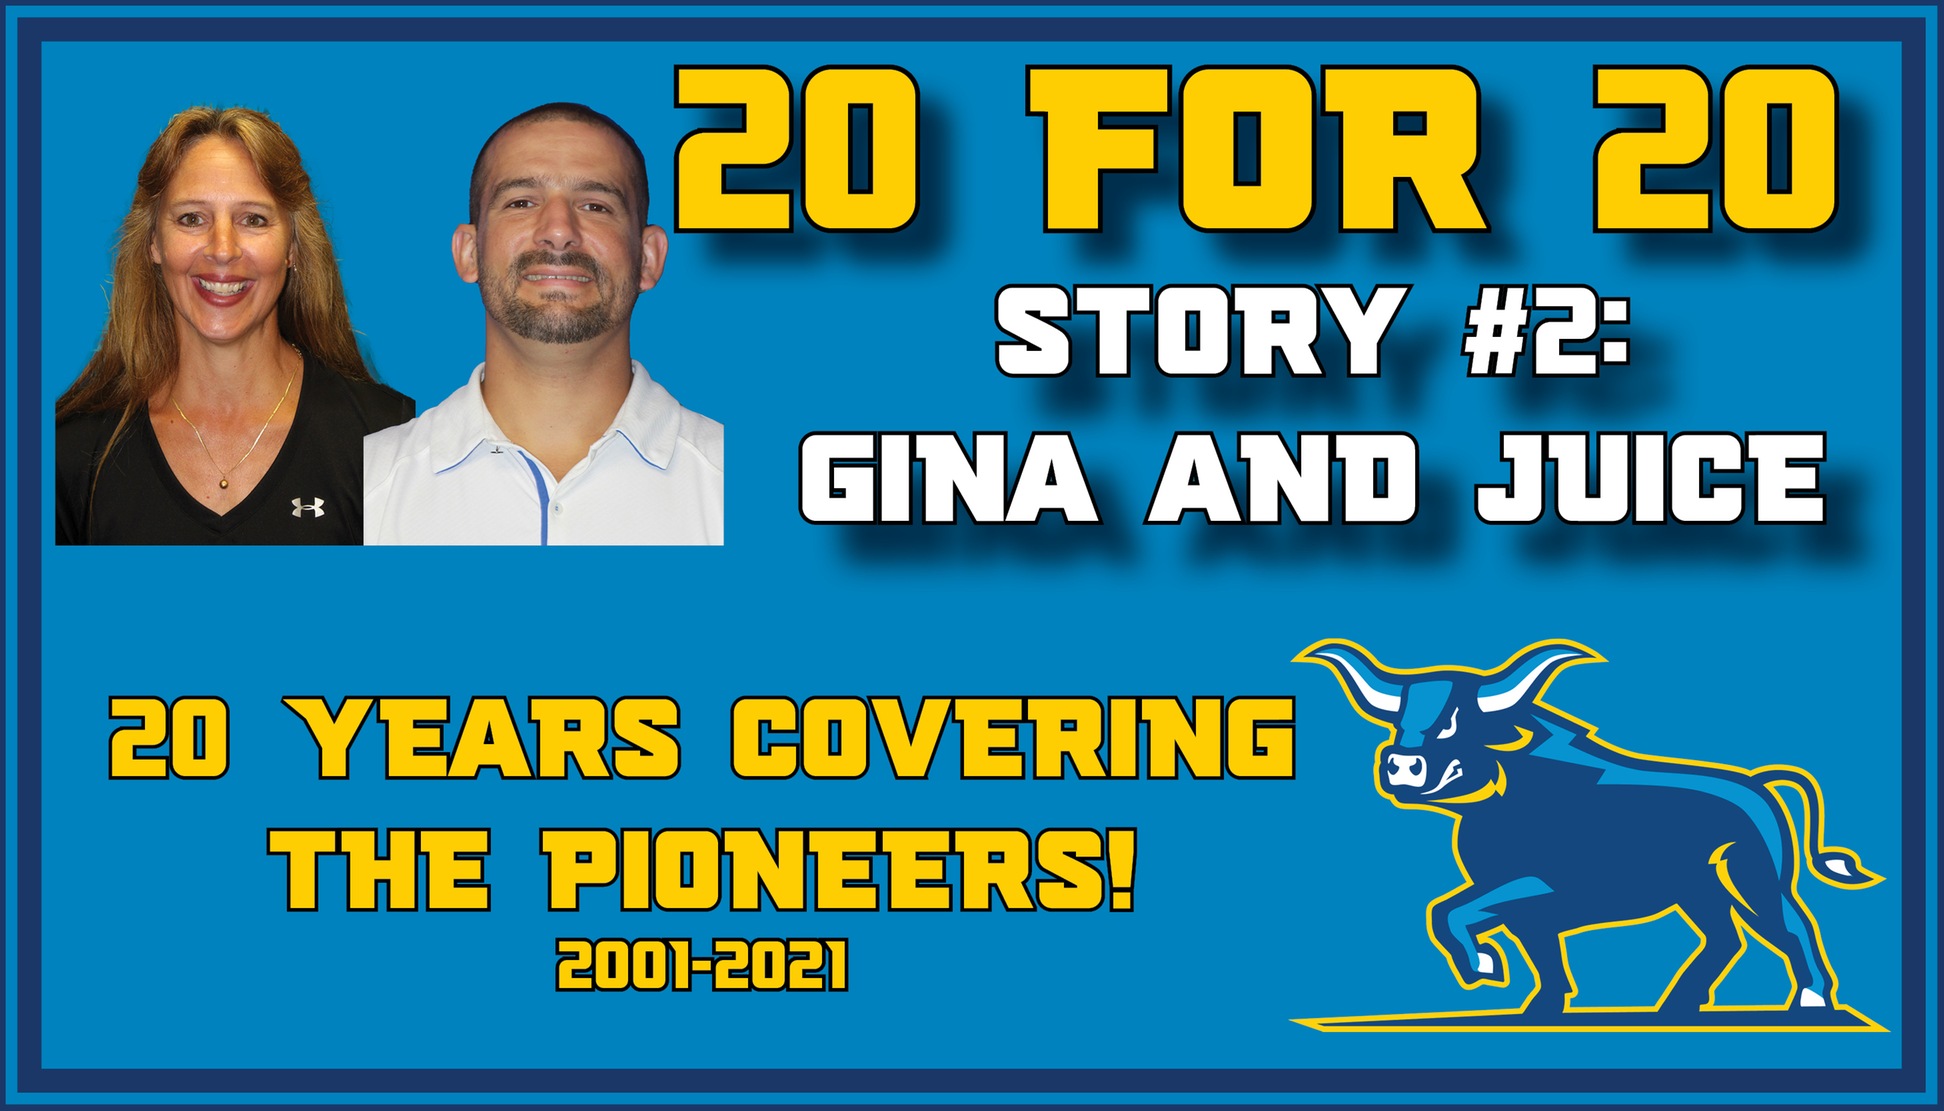 20 for 20 - Story #2 - Gina and Juice